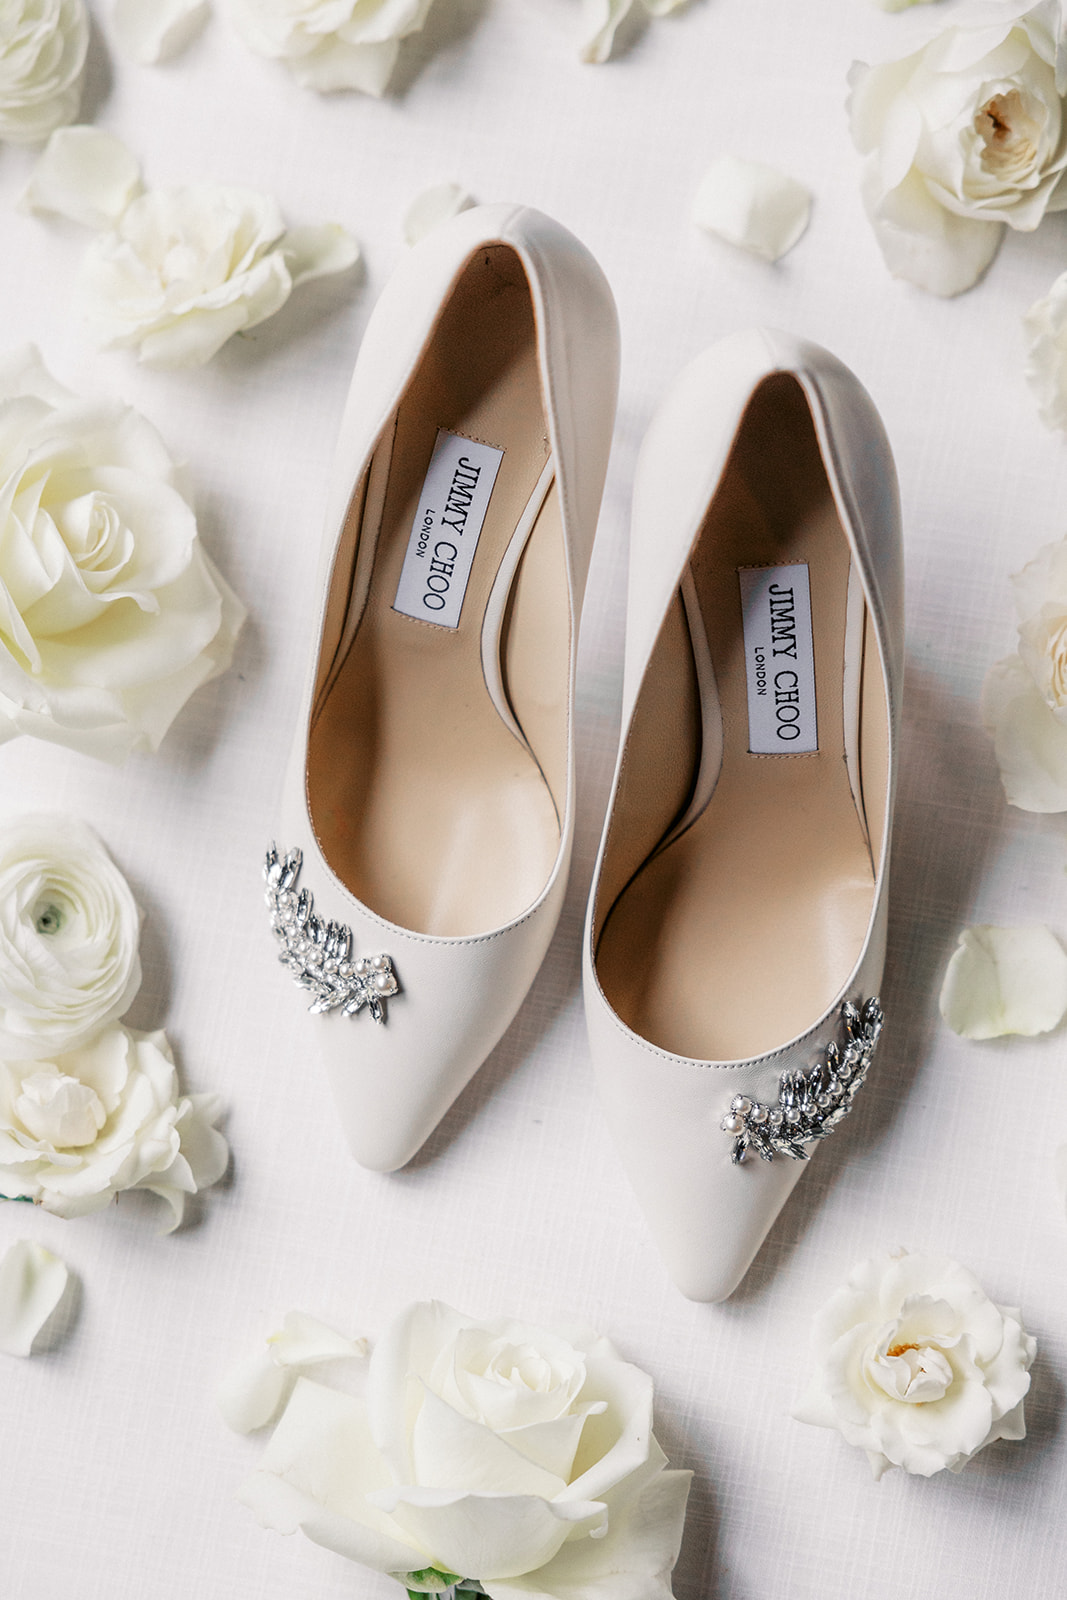 Details of a brides white Jimmy Choo shoes surrounded by white roses